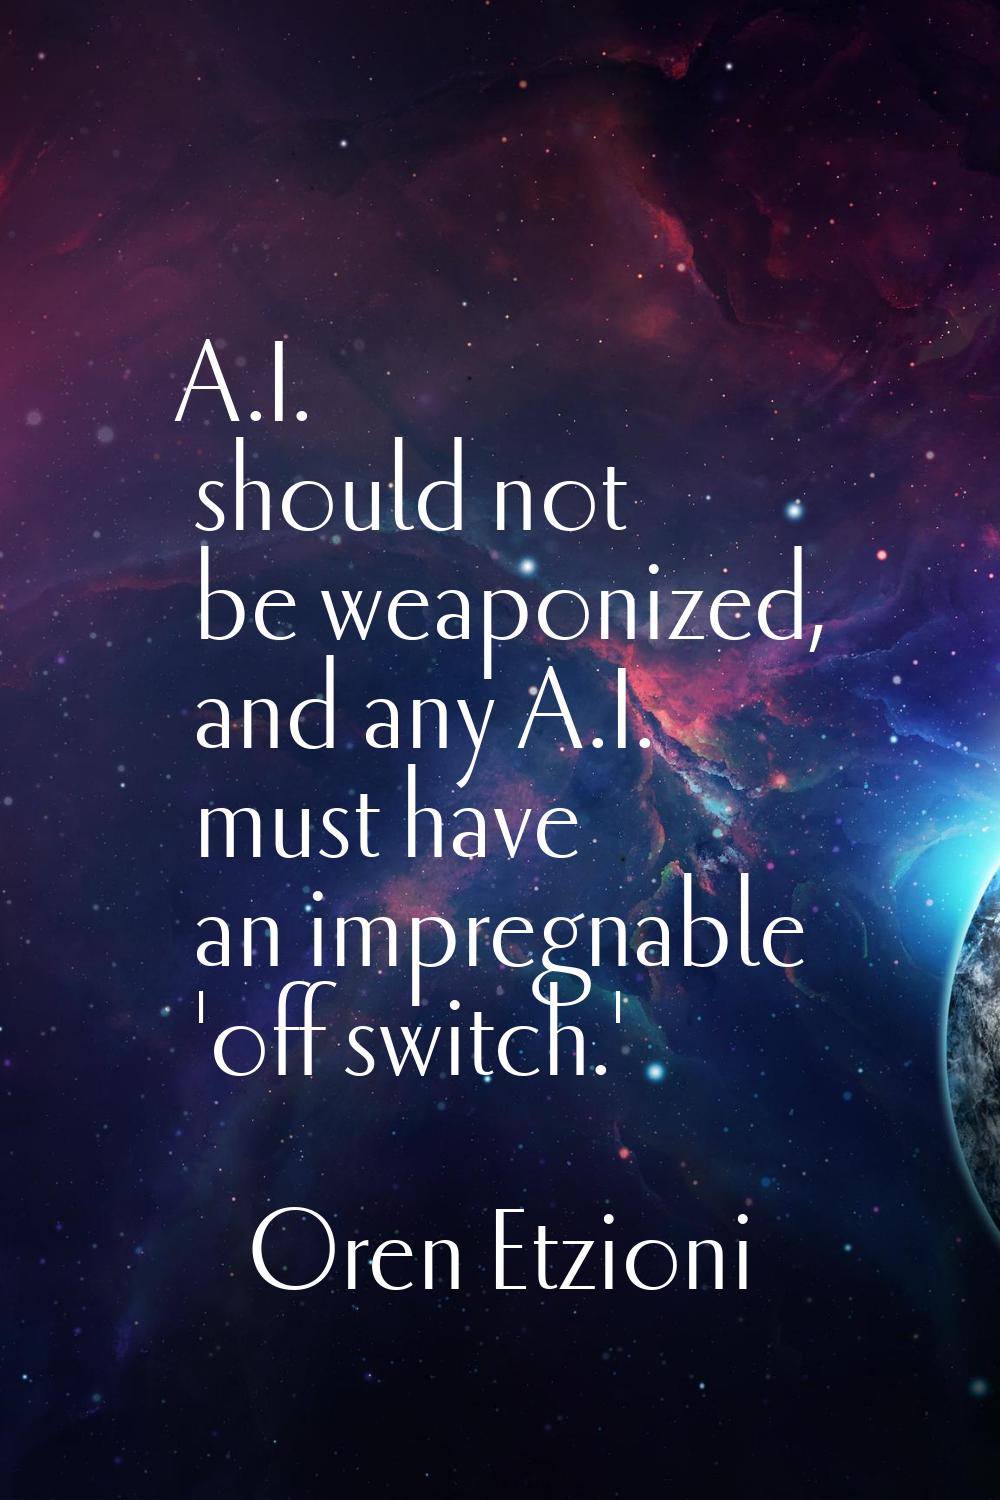 A.I. should not be weaponized, and any A.I. must have an impregnable 'off switch.'